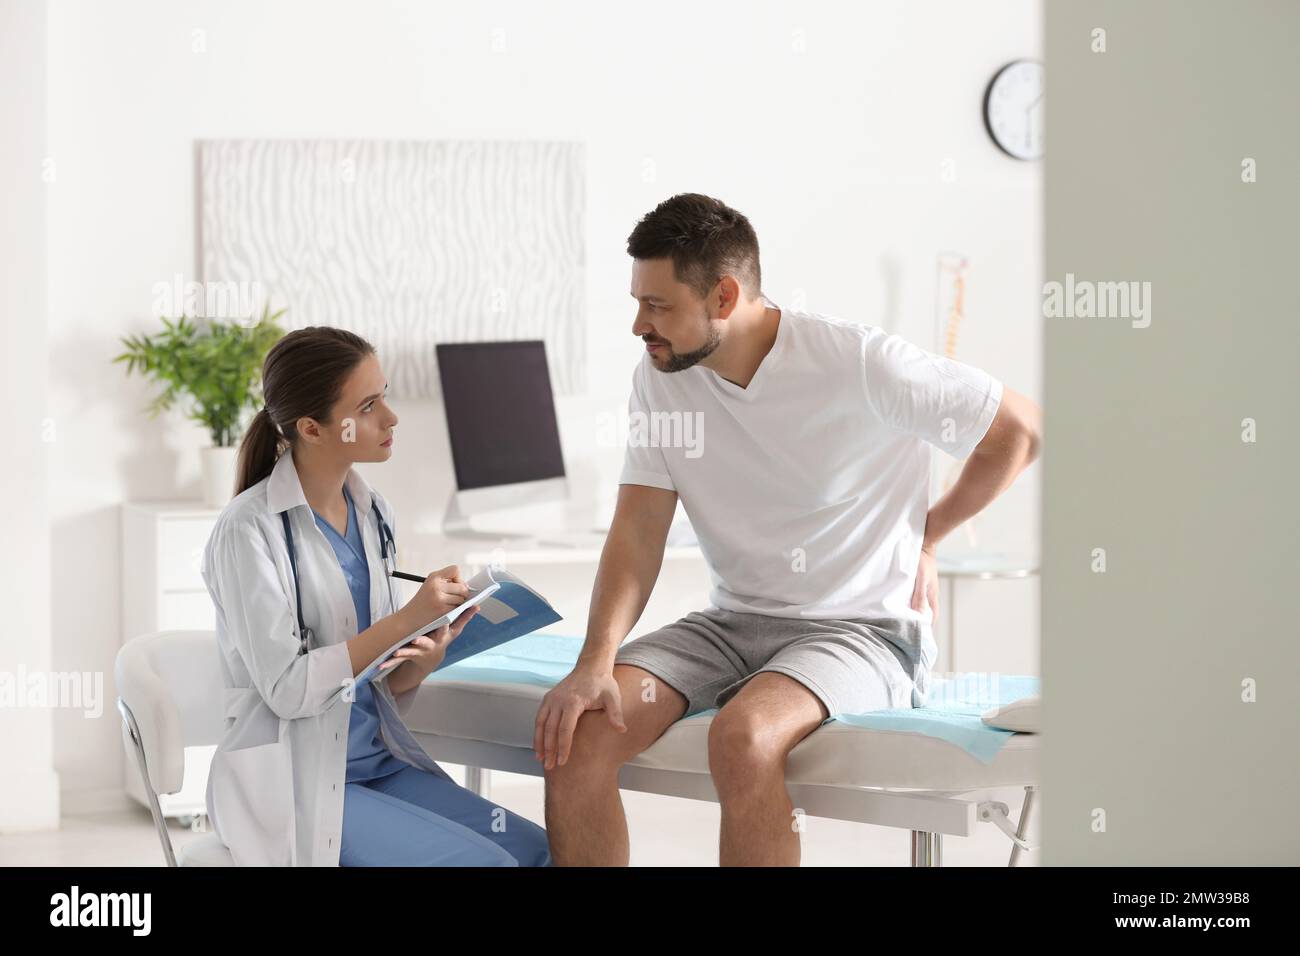 Female orthopedist examining patient with injured back in clinic Stock Photo